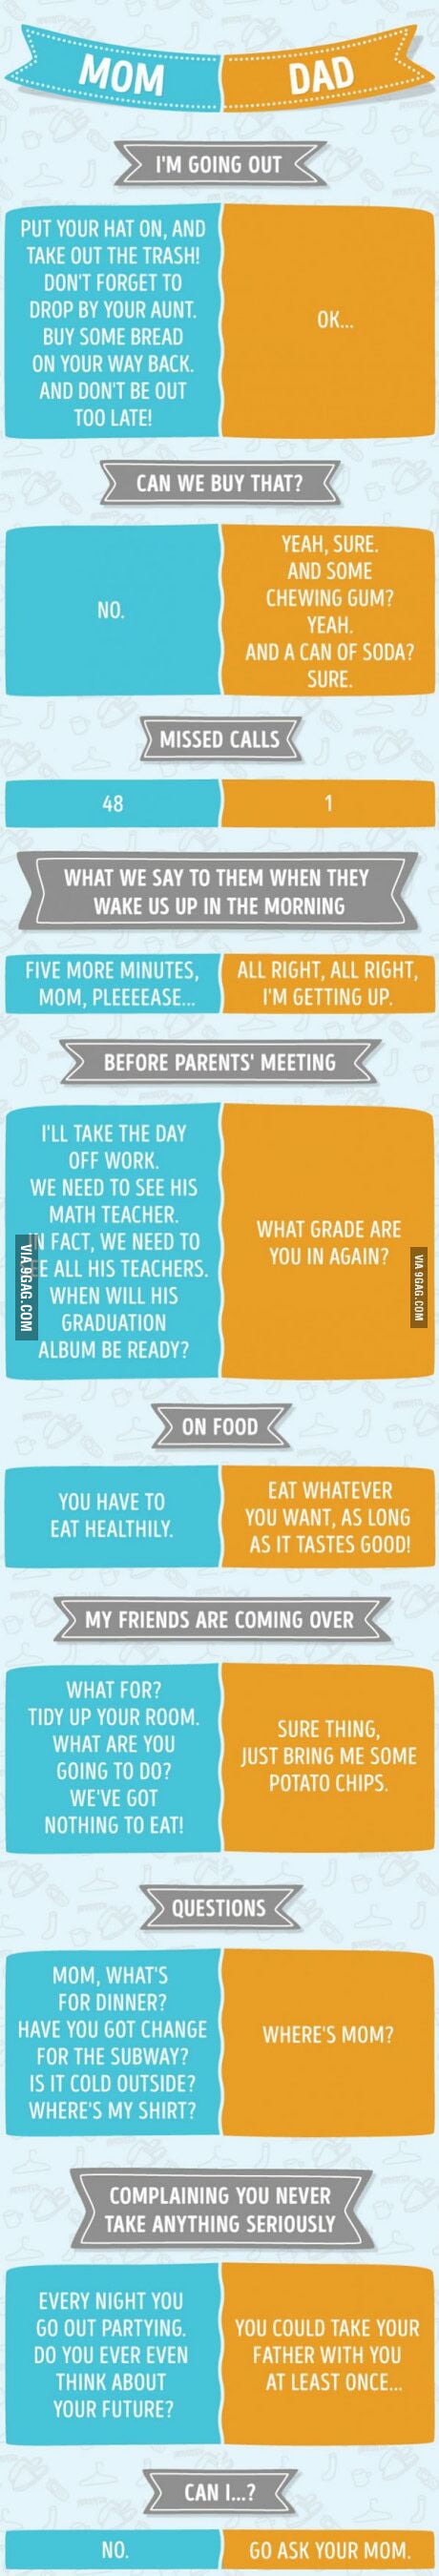 Differences Between Mom And Dad 9gag